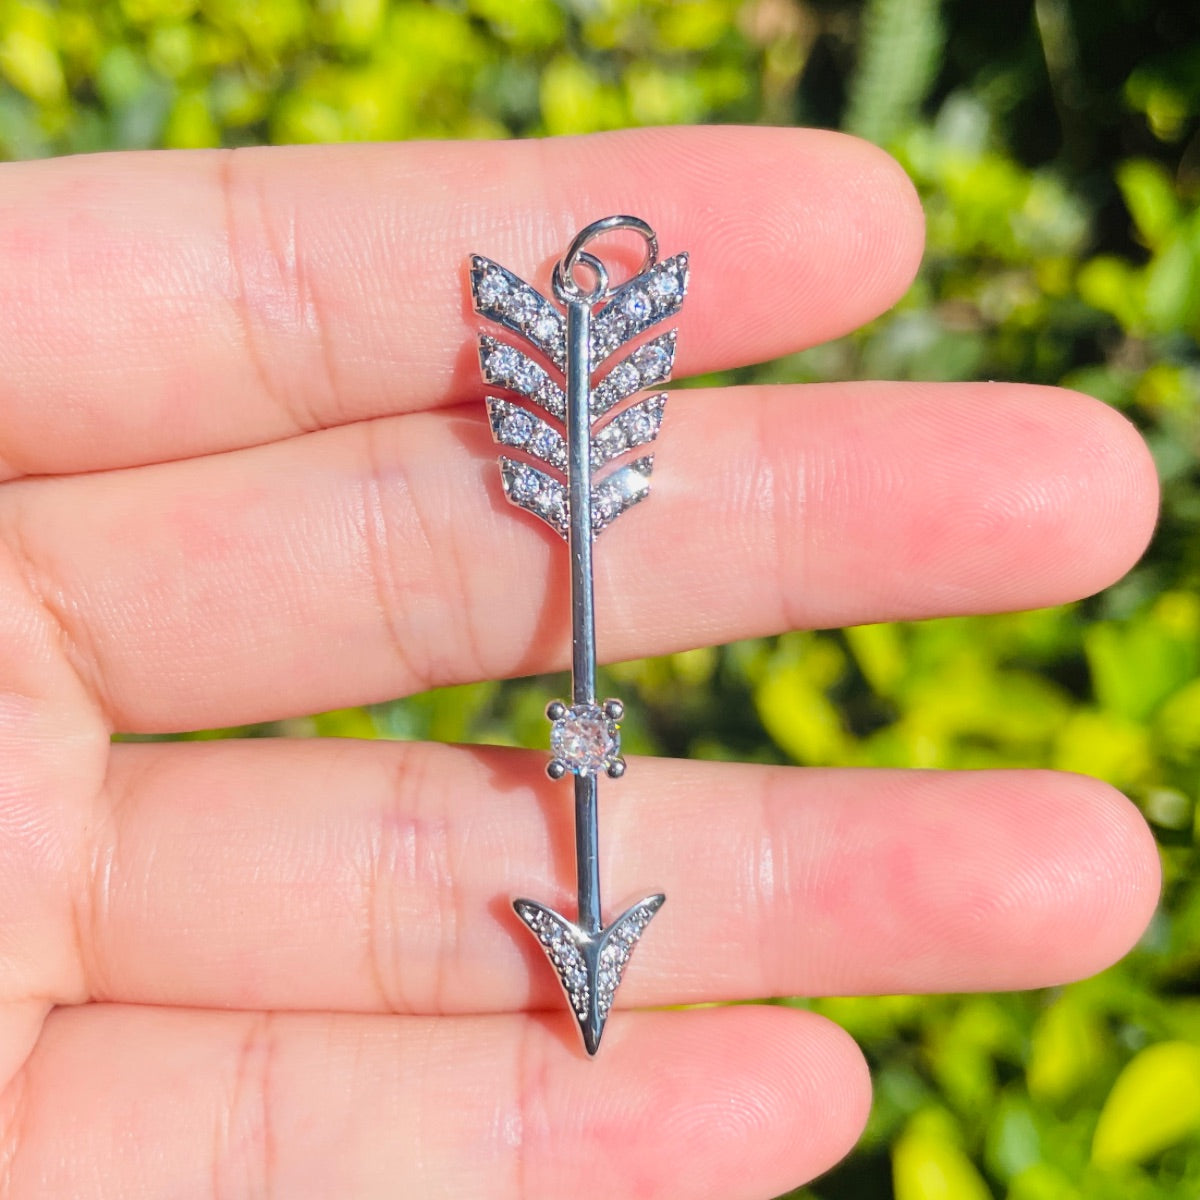 10pcs/lot 47.5*13mm CZ Paved Arrow Charms for Bracelet & Necklace Making Silver CZ Paved Charms New Charms Arrivals Symbols Charms Beads Beyond